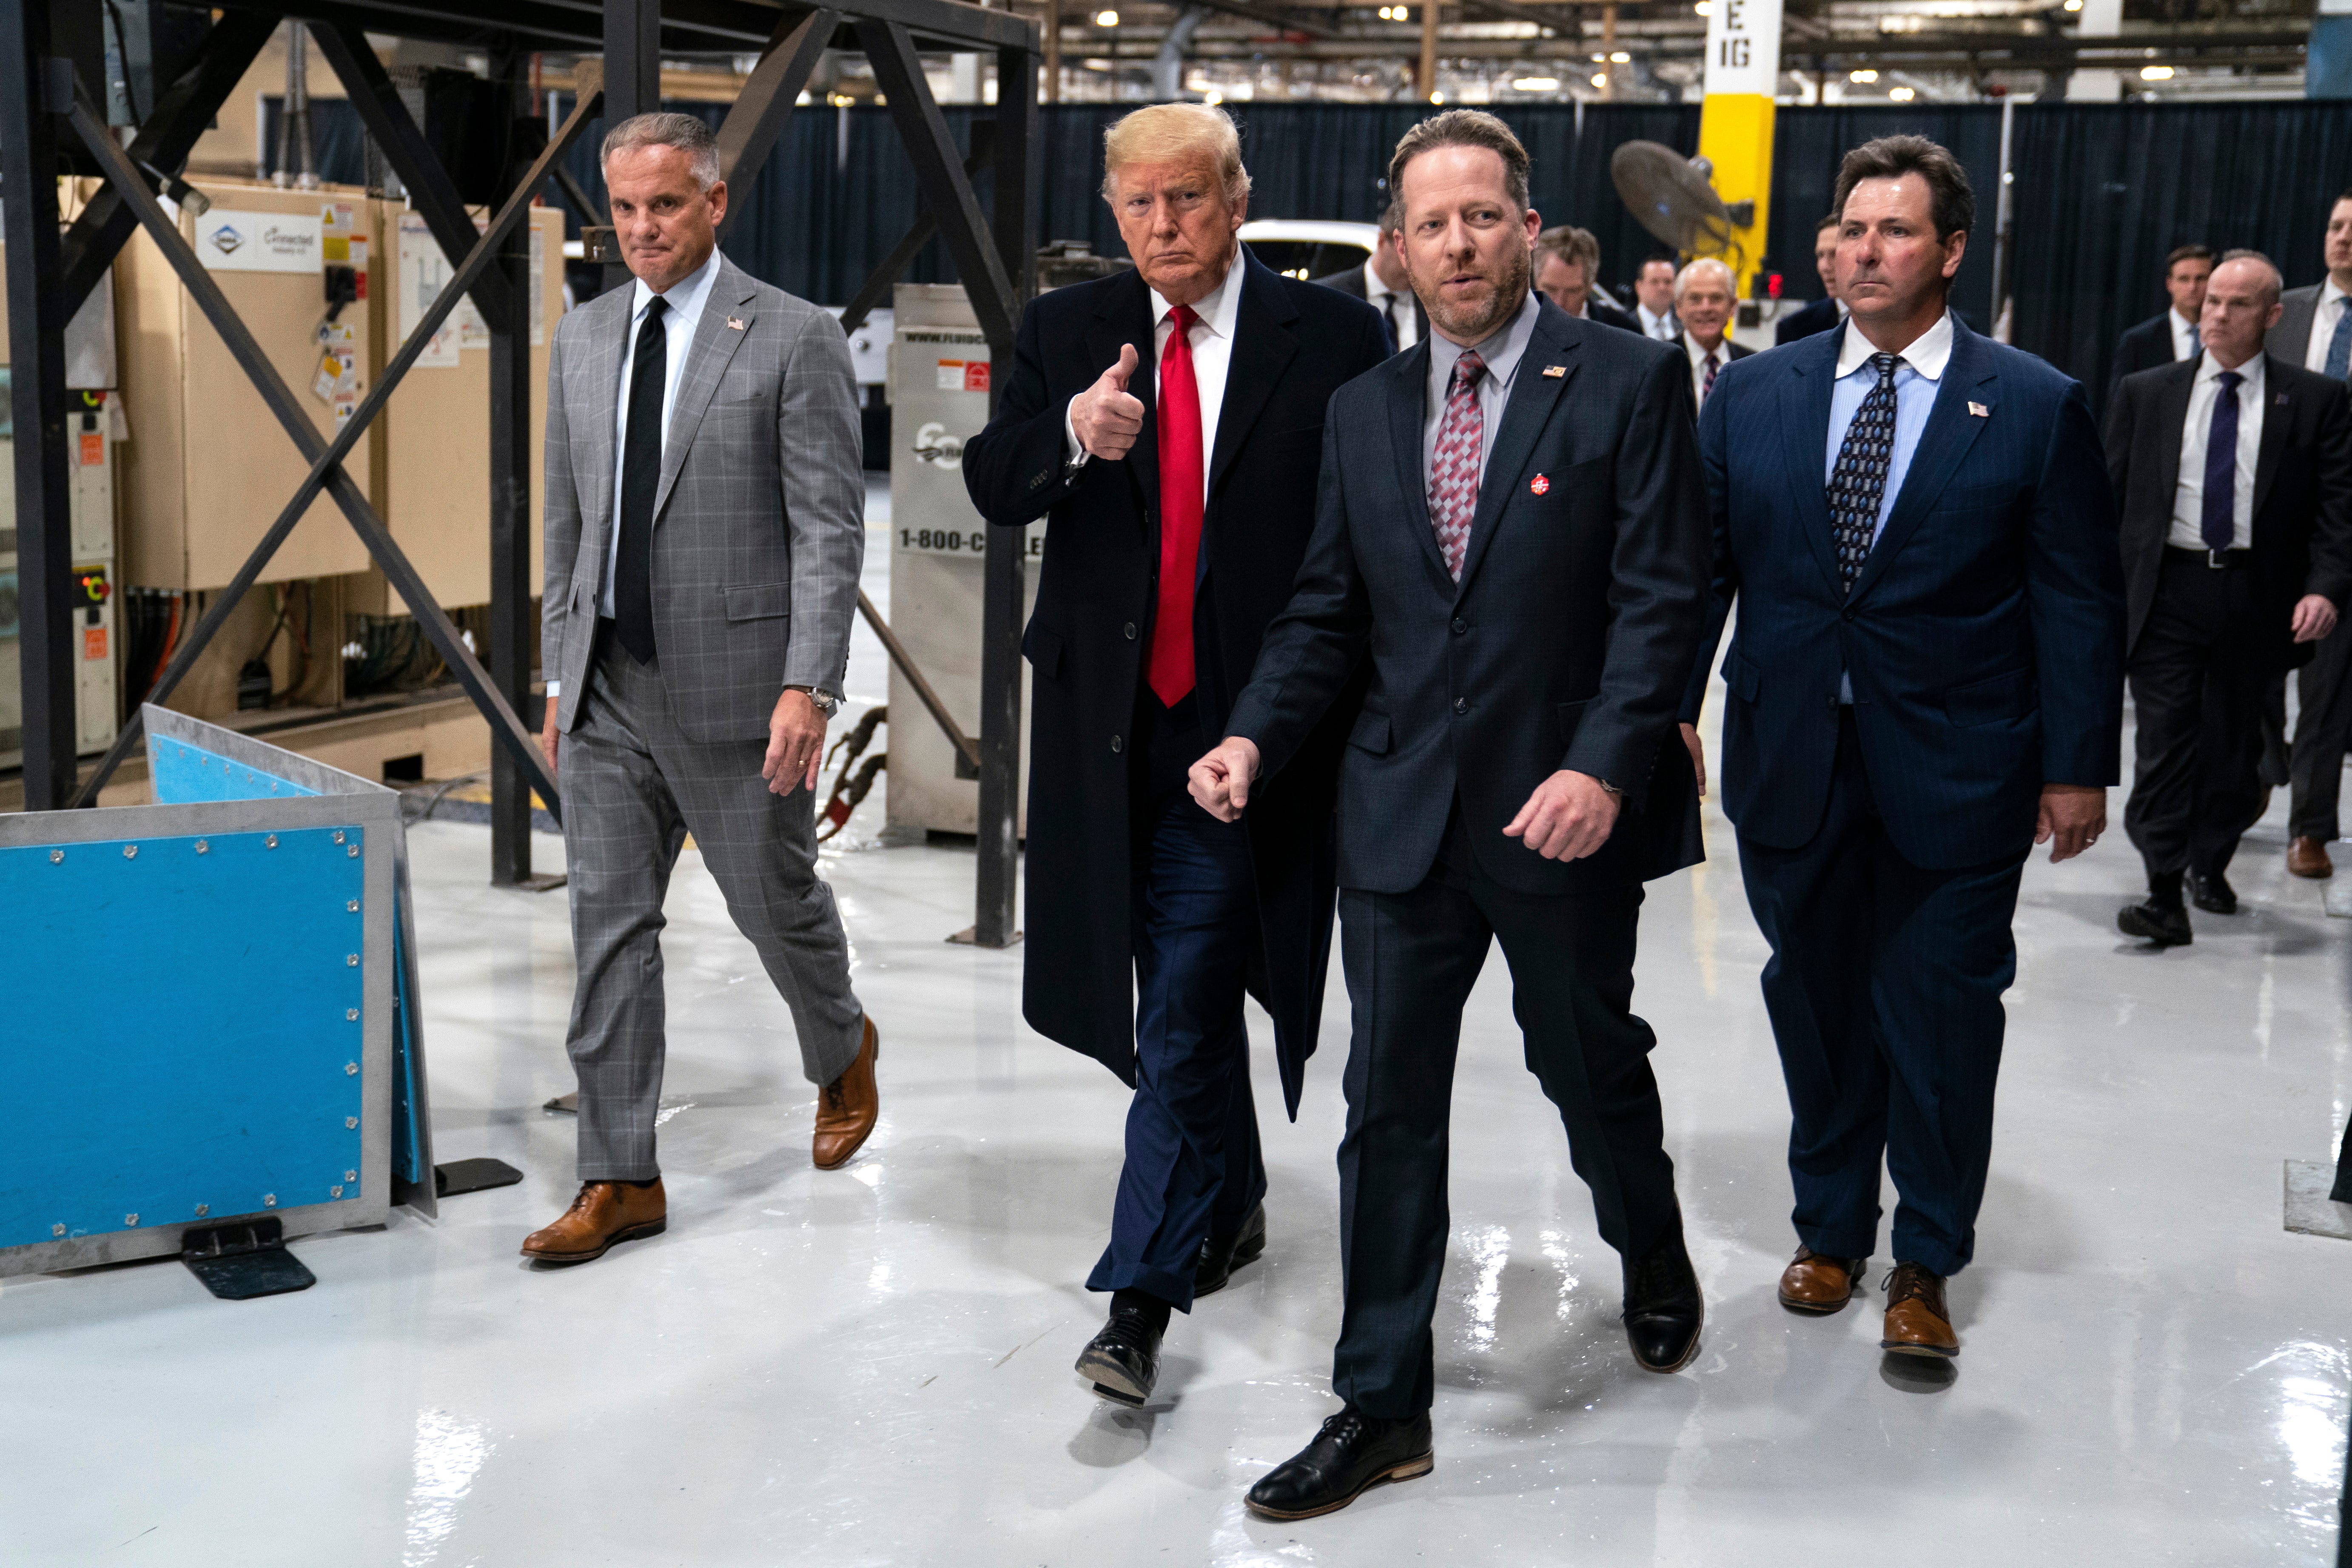 President Donald Trump tours Dana Incorporated before speaking about the new North American trade agreement, Thursday, Jan. 30, 2020, in Warren, Mich.